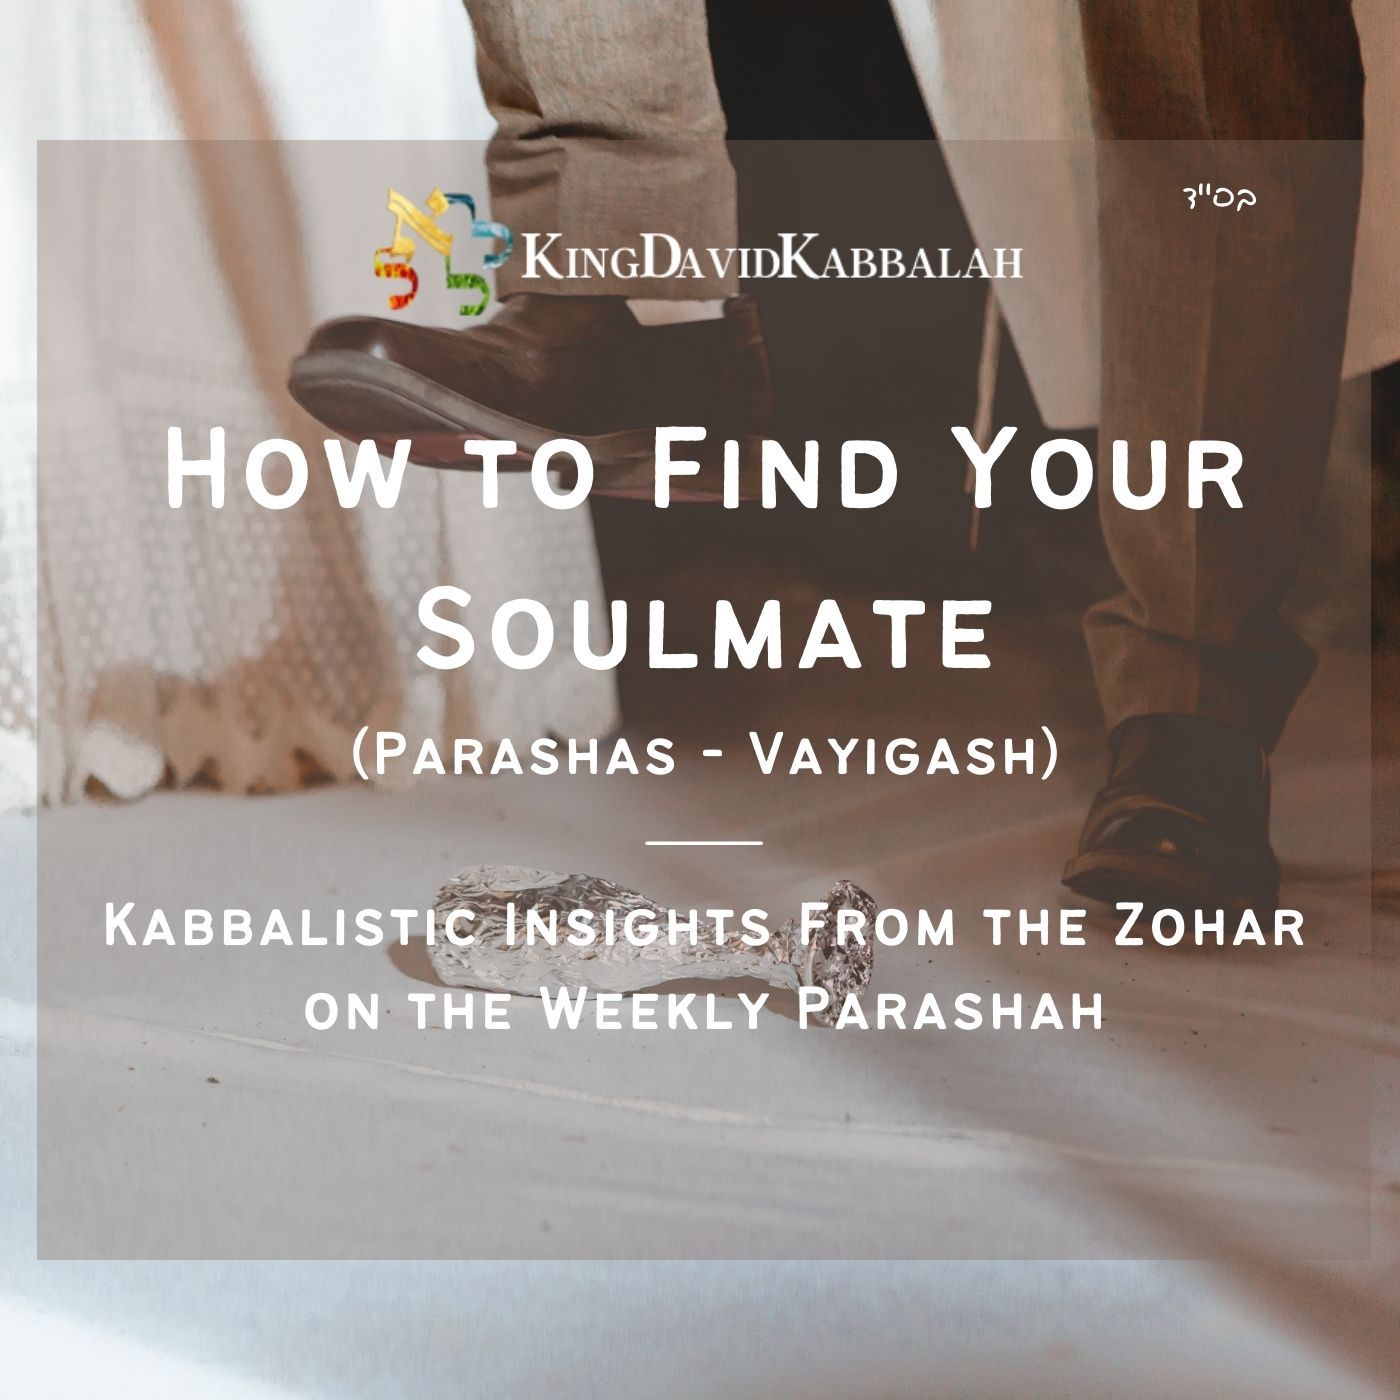 How to Find Your Soulmate - Kabbalistic Inspiration on the Parasha from the Zohar